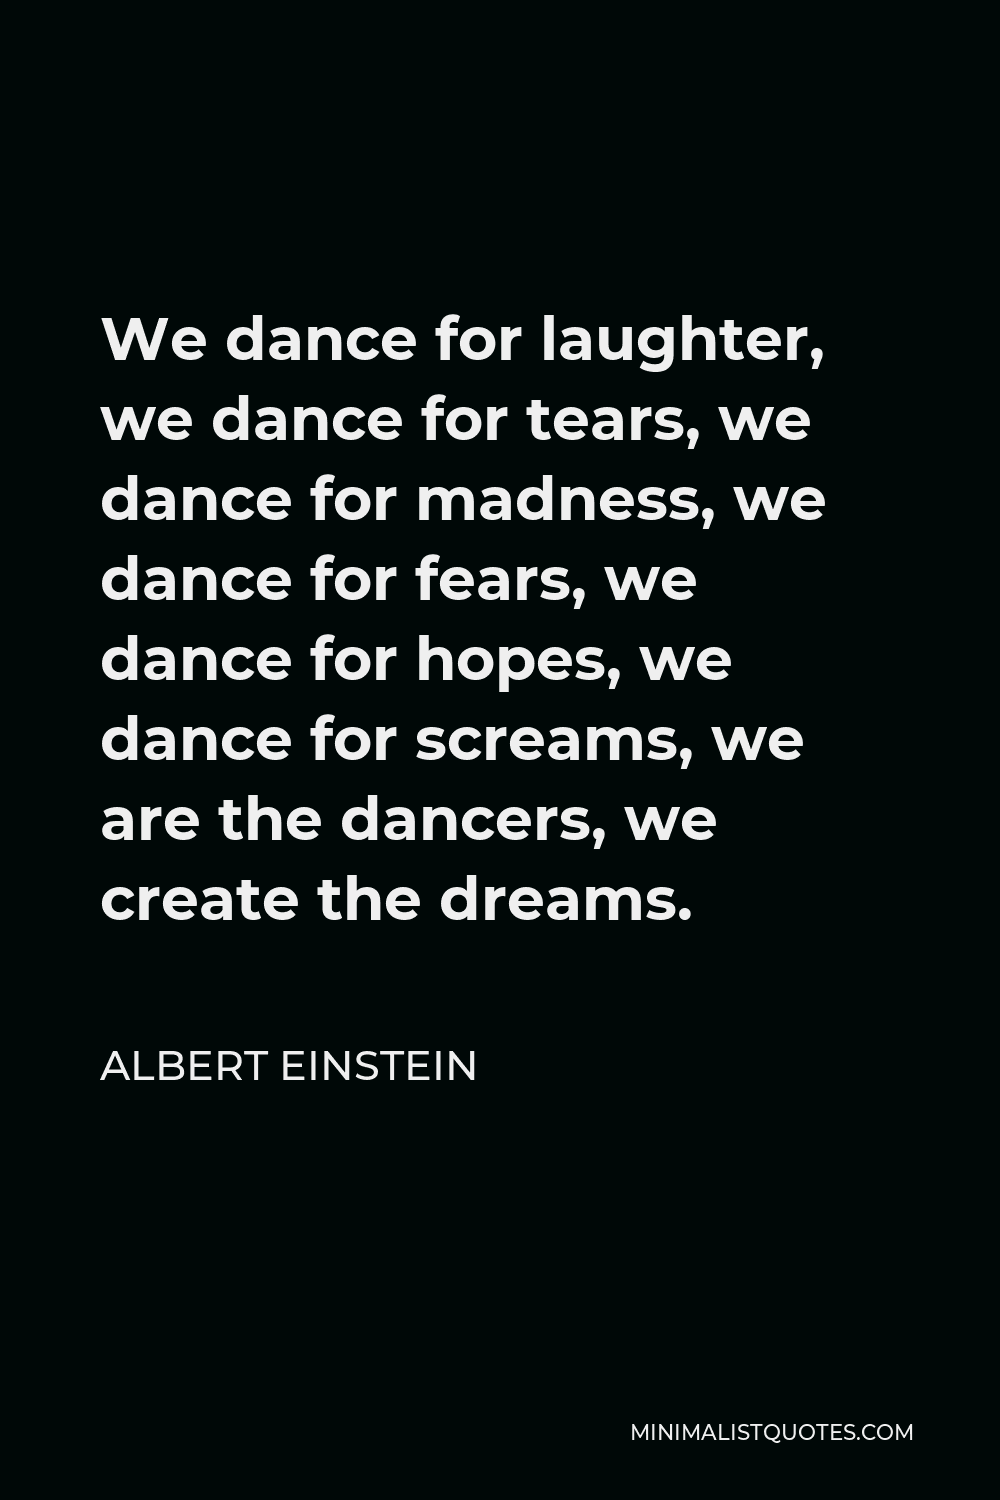 Albert Einstein Quote - We dance for laughter, we dance for tears, we dance for madness, we dance for fears, we dance for hopes, we dance for screams, we are the dancers, we create the dreams.